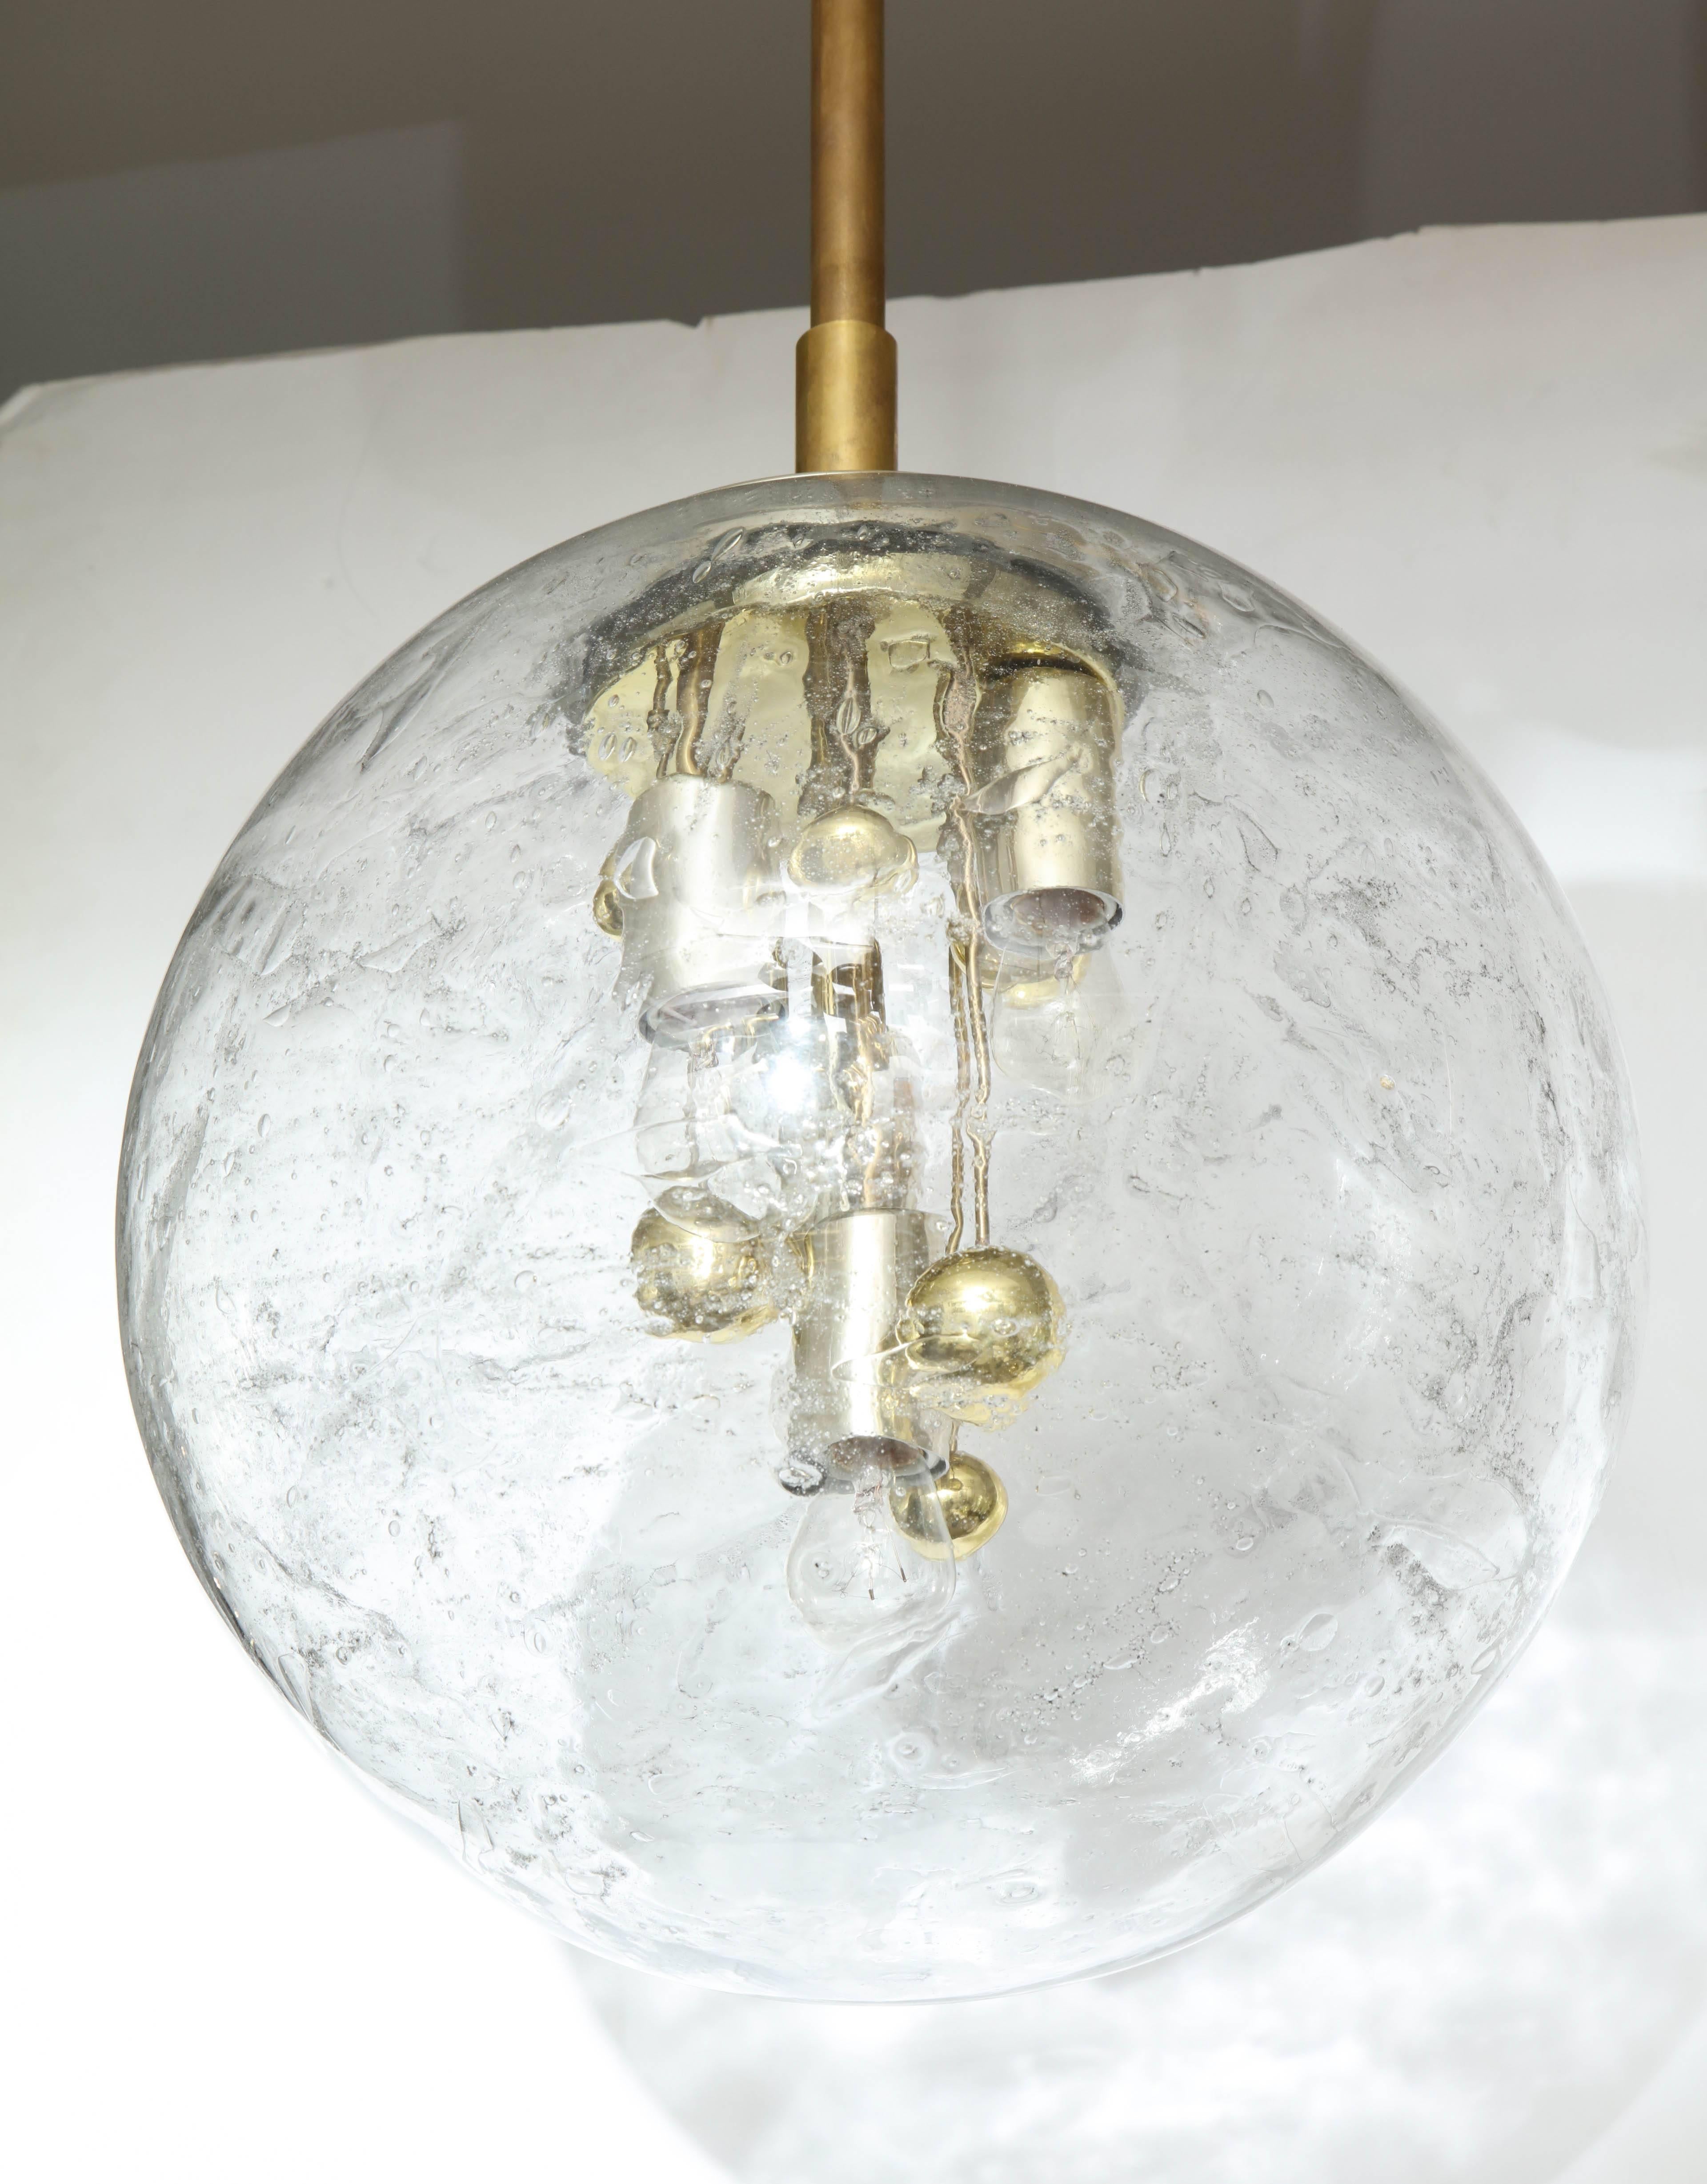 1970s Space Age Sputnik pendant light by Doria.
Amazing large Murano glass globe with a slight veining pattern.
The four light sources which have been newly rewired for the US are complemented by suspended brass spheres. The pendant has a 16